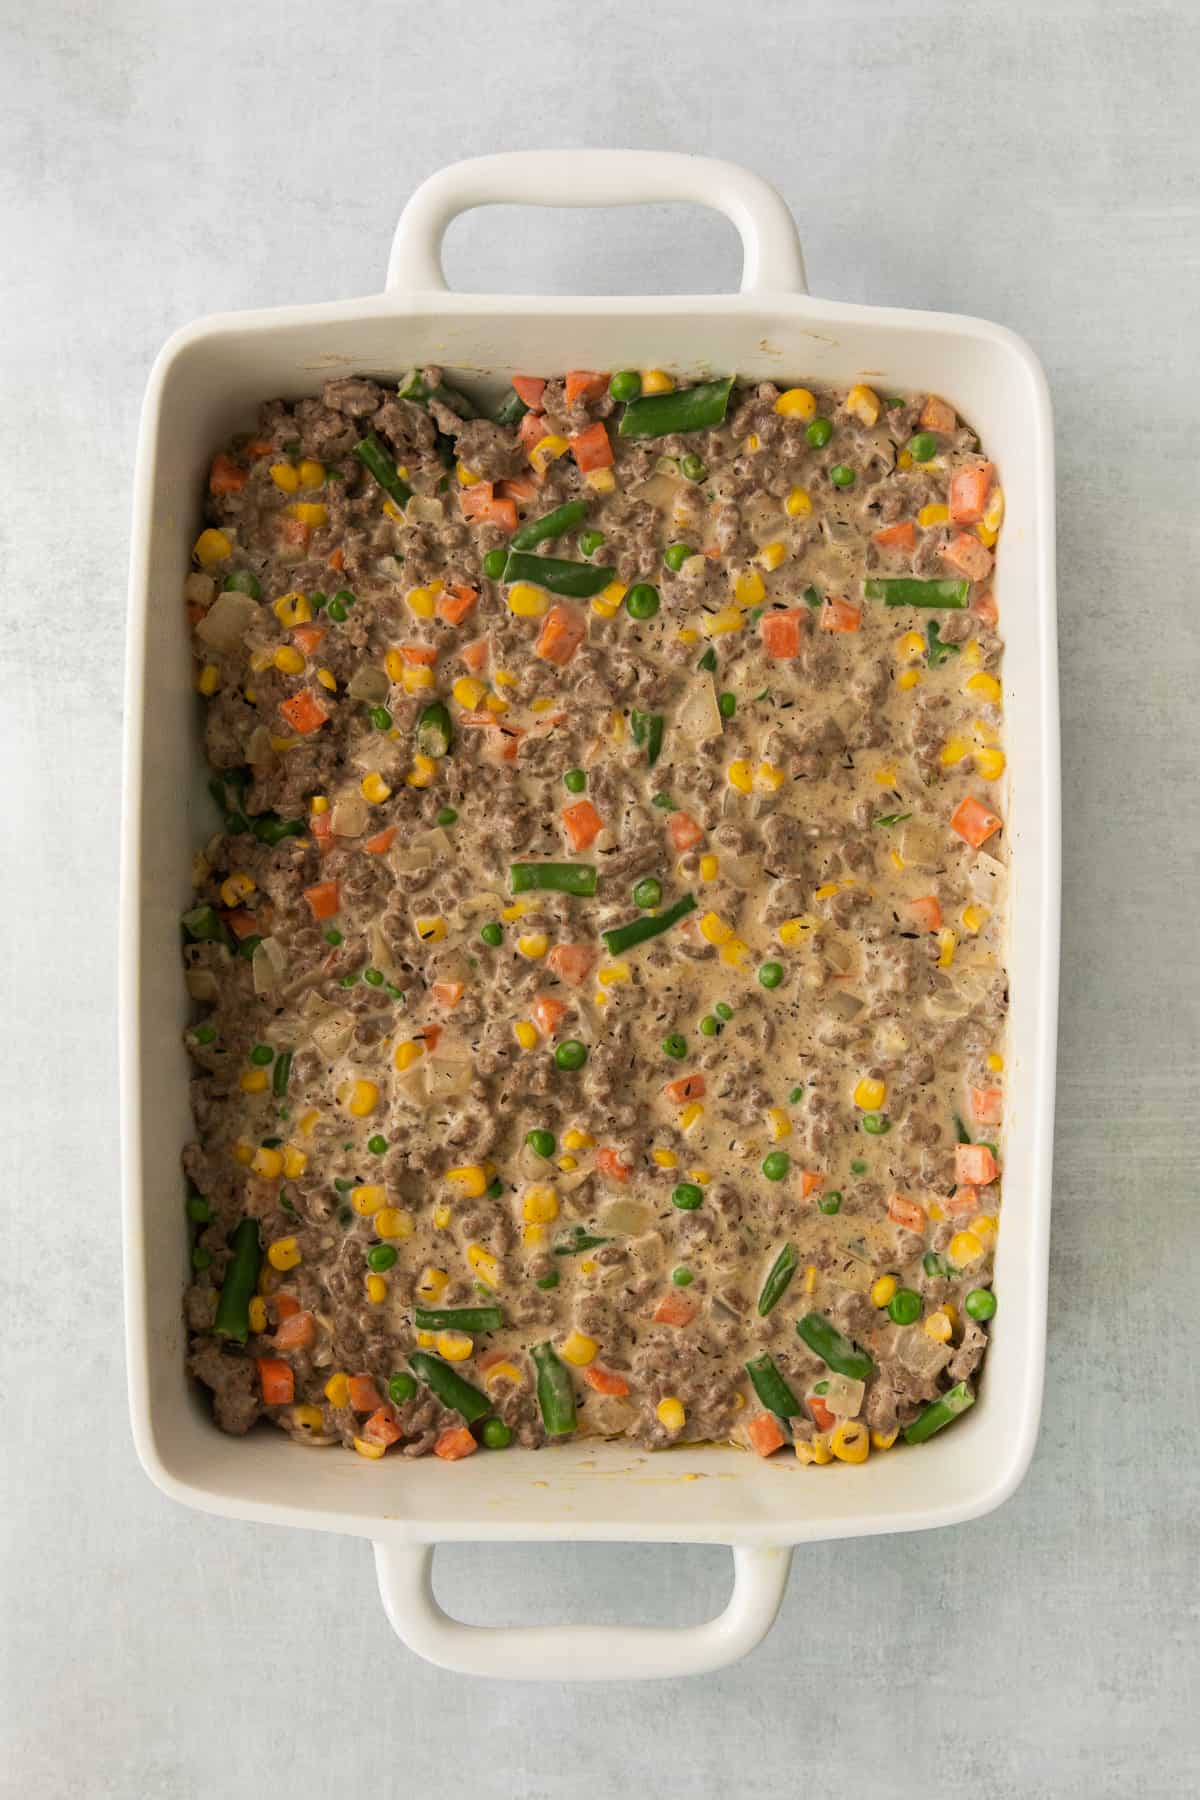 Ground beef and mixed vegetables in a casserole dish.